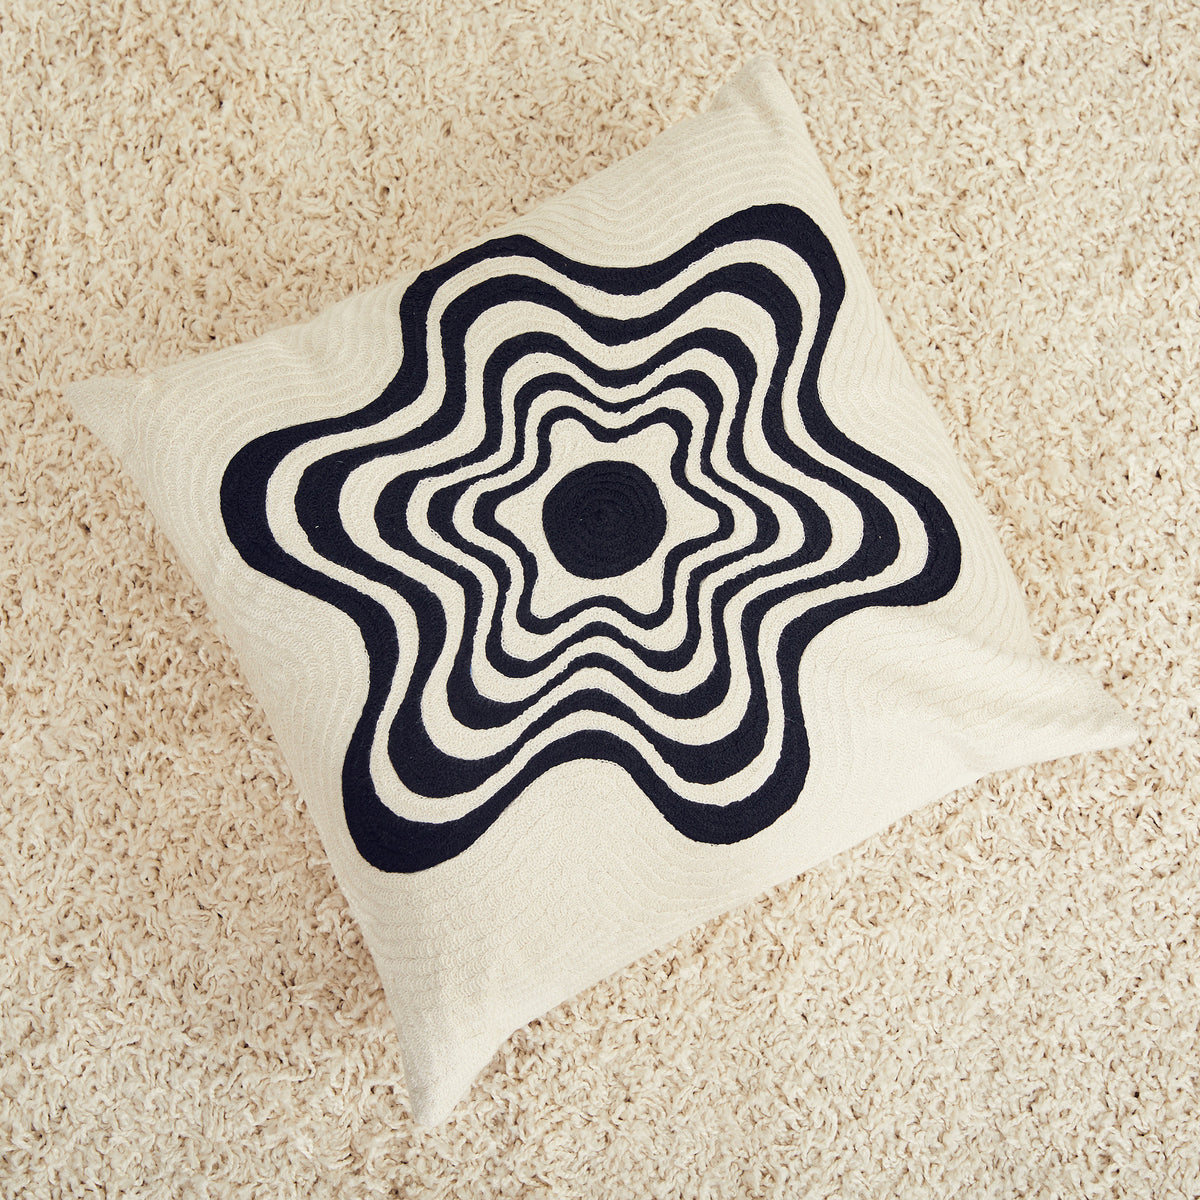 Dusen Dusen Flower pillow. Embroidered pillow in black and white Flower print. 100% cotton embroidery. Non-embroidered natural canvas back with a zipper opening. Made in India. Polyfill-down alternative inserts mimic the fluffiness of natural down. Insert is made in the USA.